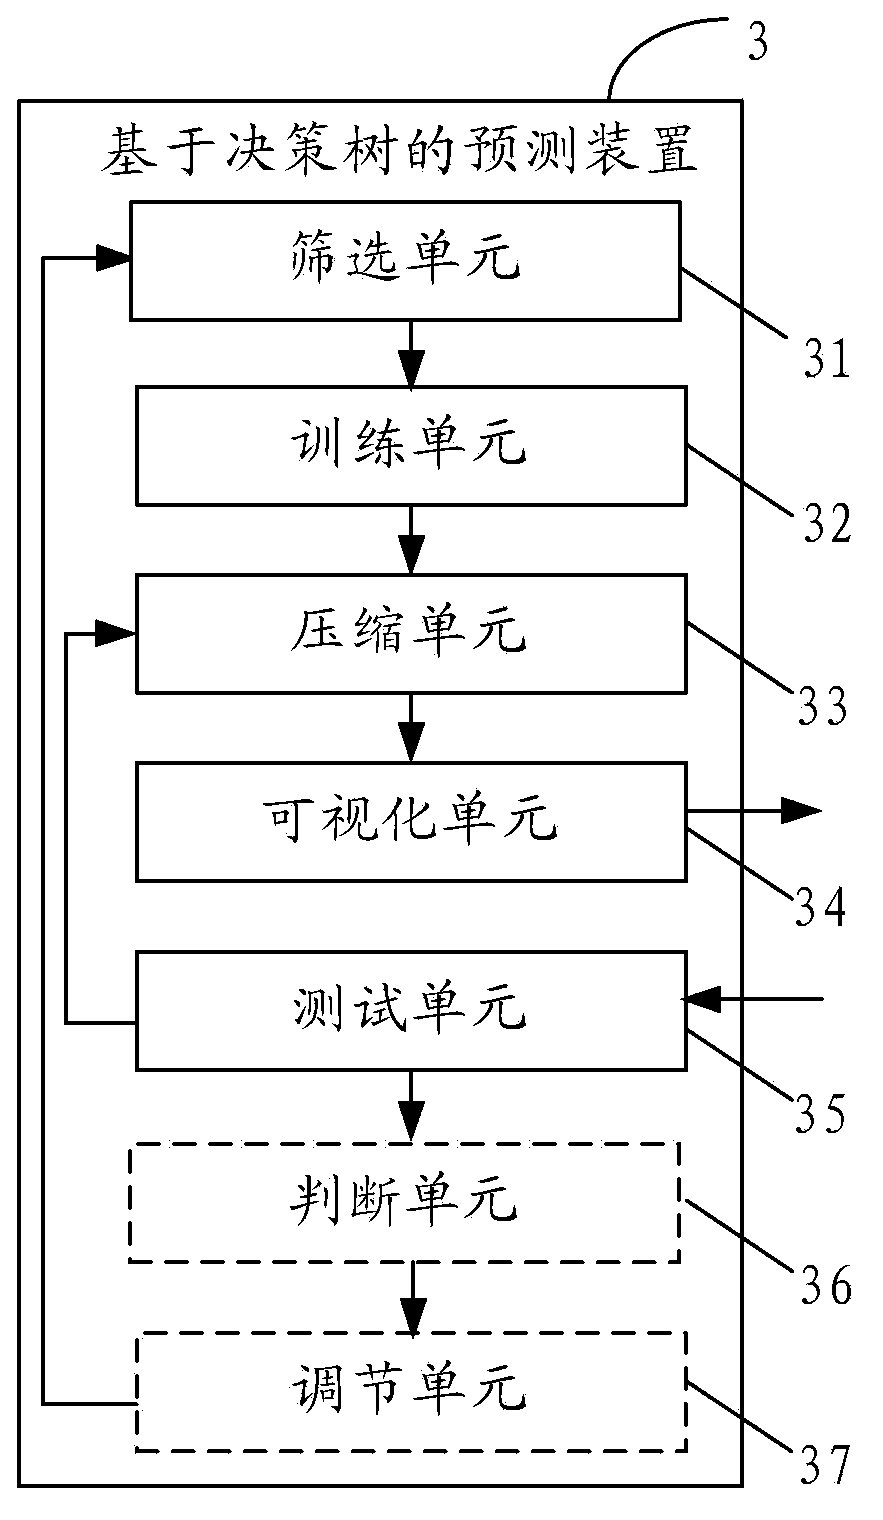 Decision-making tree based prediction method and device